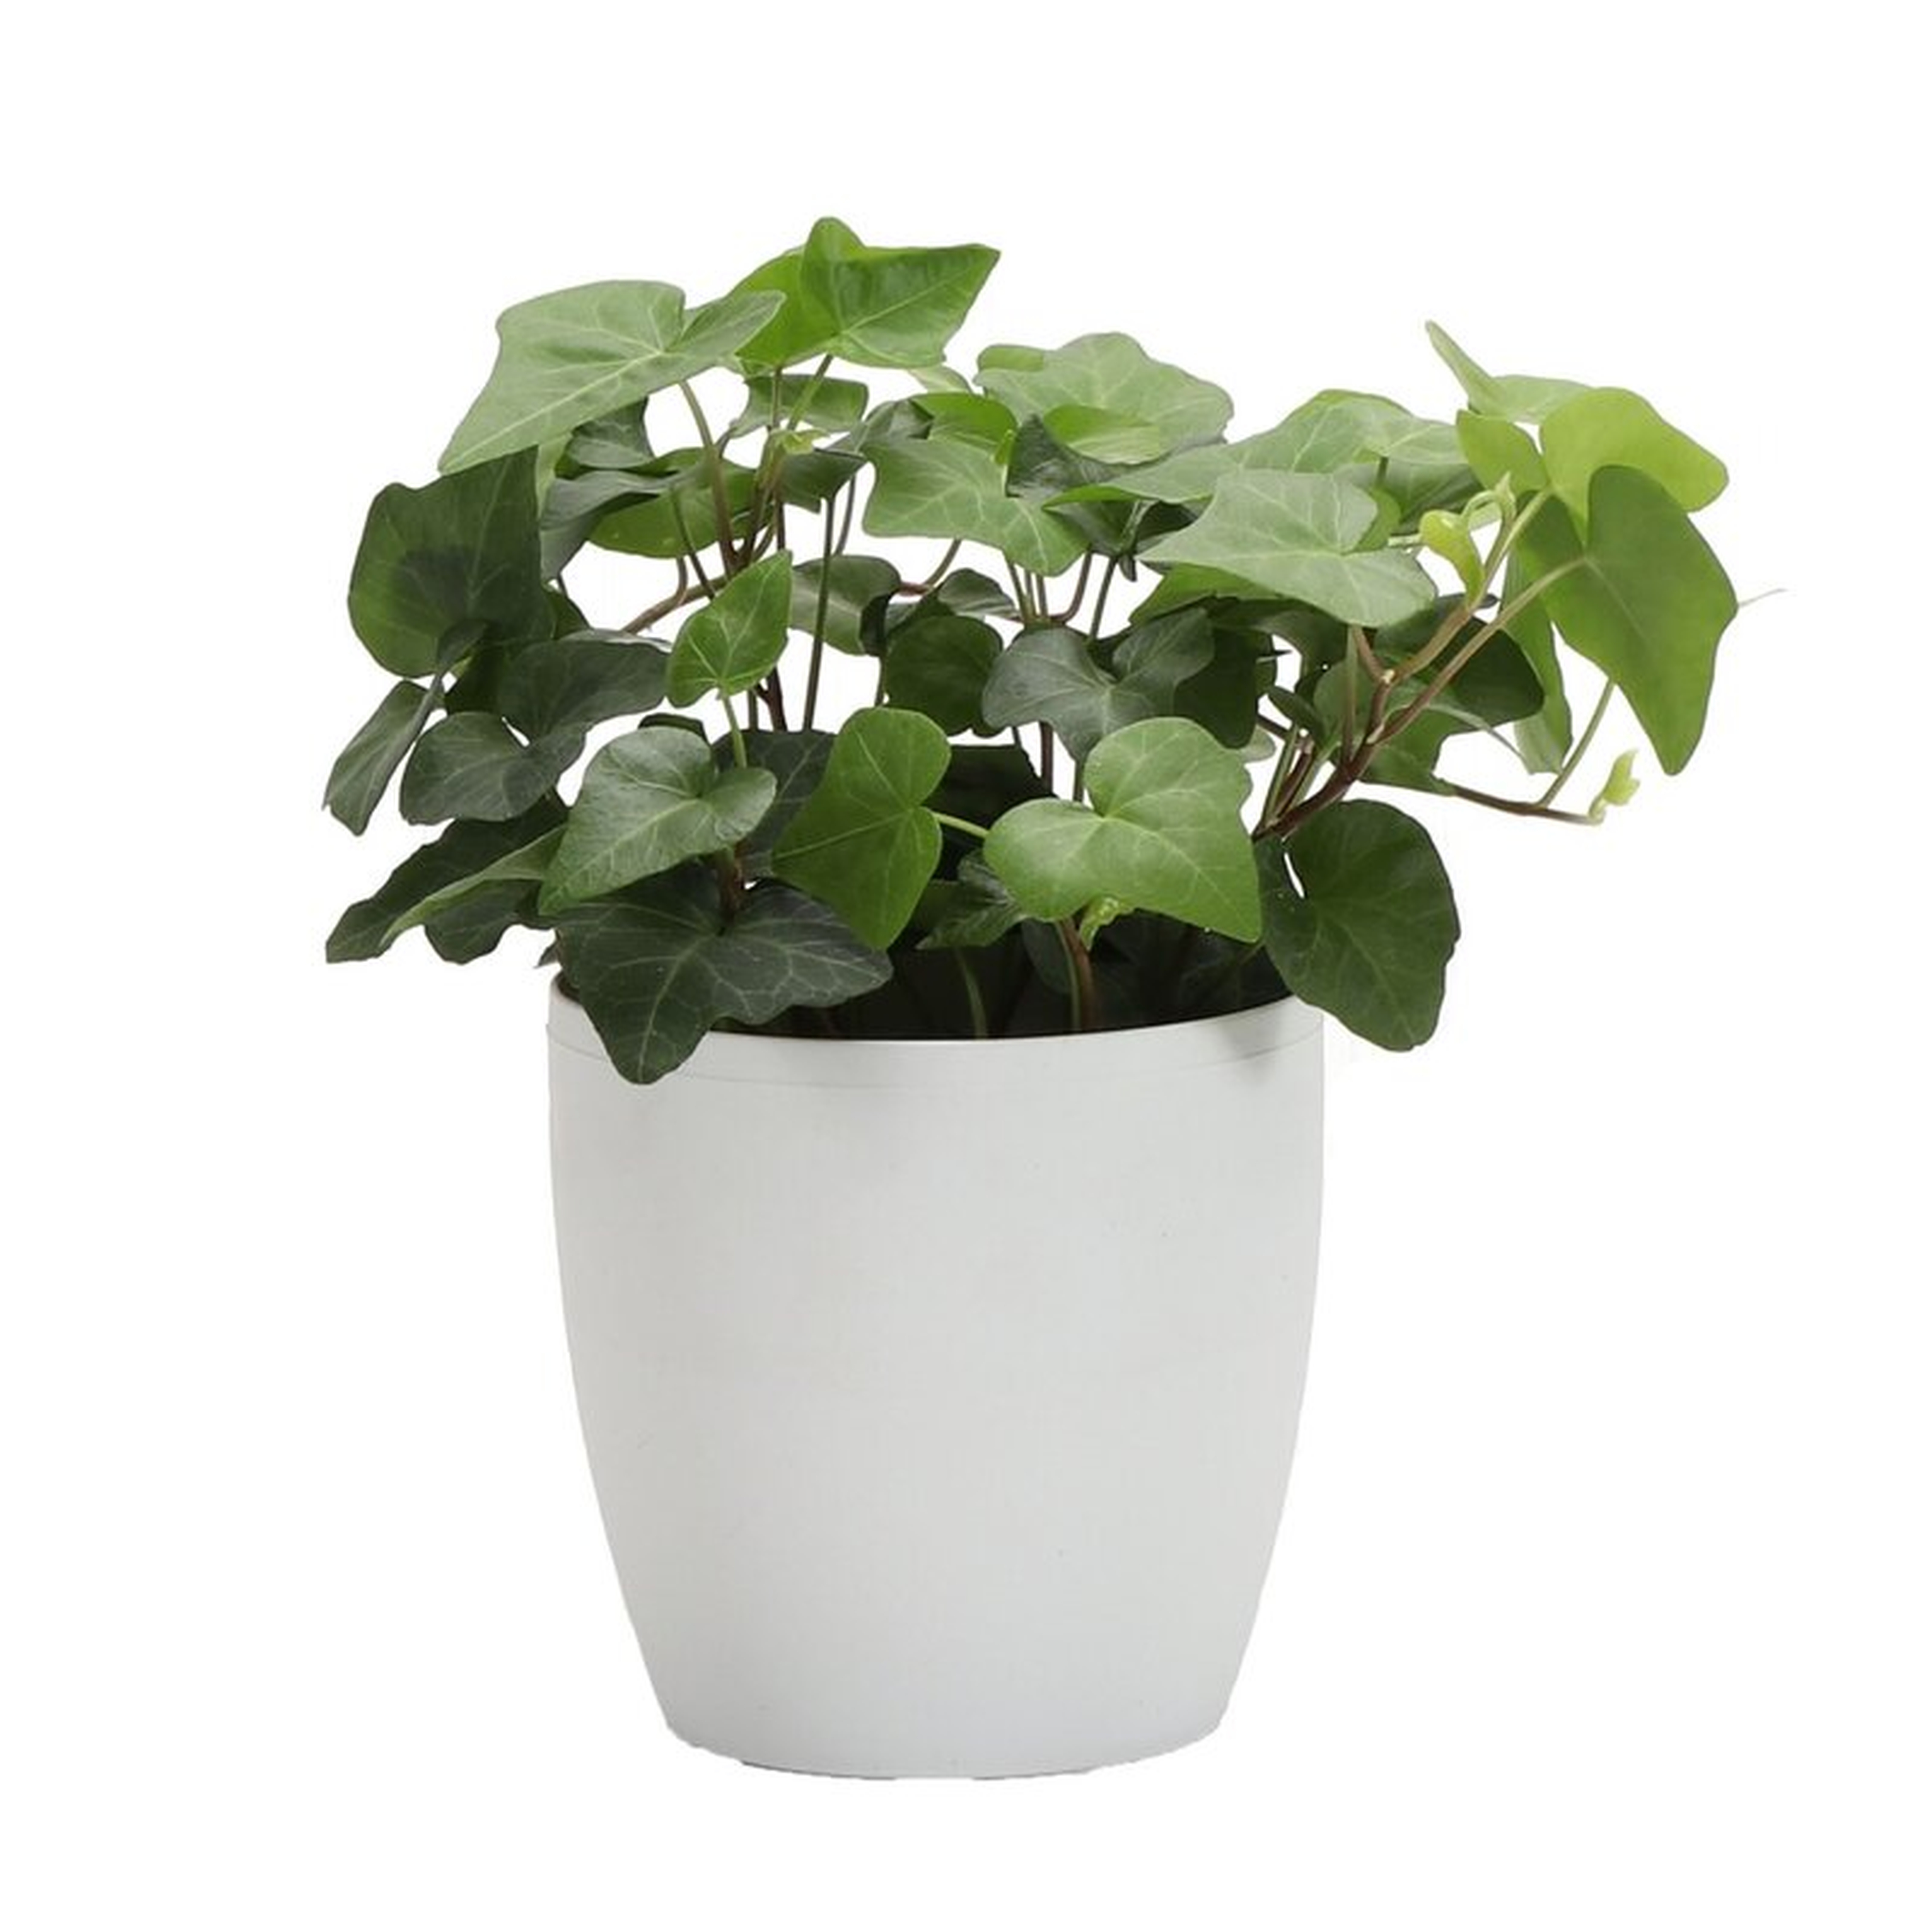 Thorsen's Greenhouse 4" Live Ivy Plant in Pot Base Color: White - Perigold